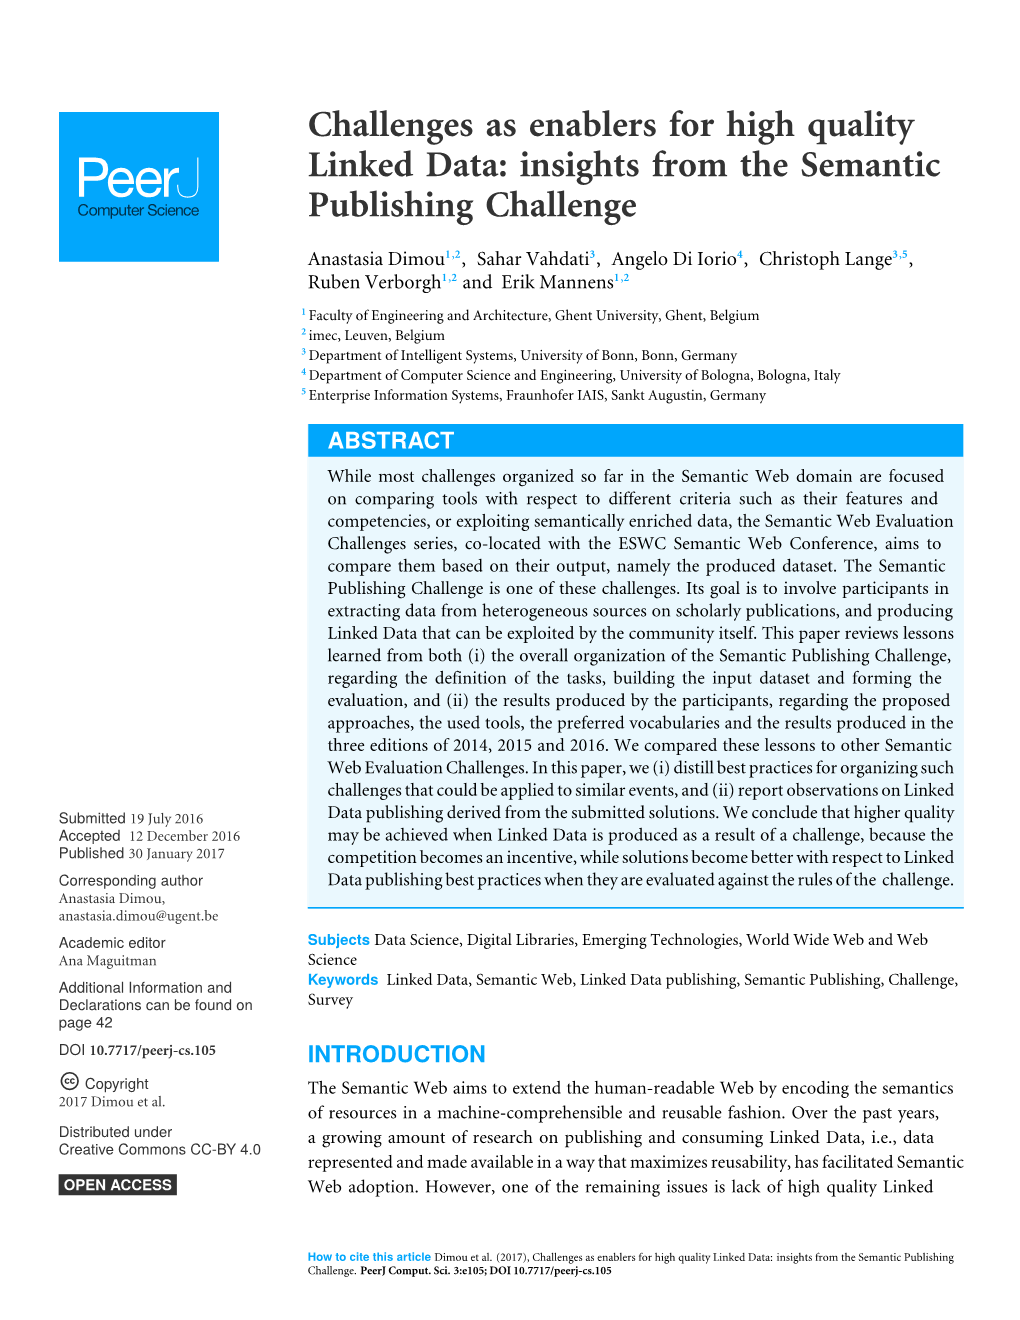 Insights from the Semantic Publishing Challenge